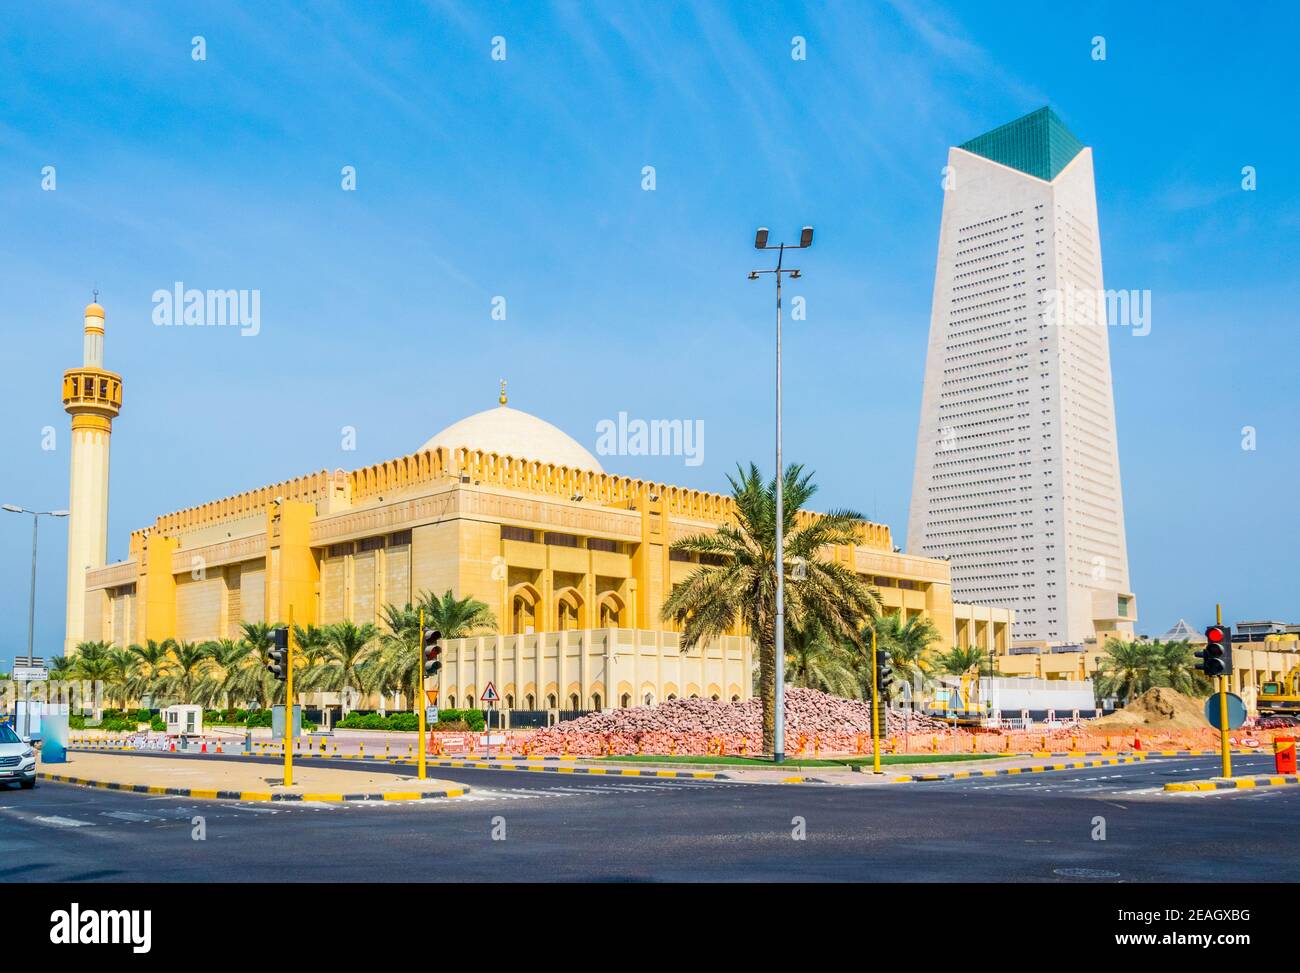 The Grand mosque of Kuwait Stock Photo - Alamy